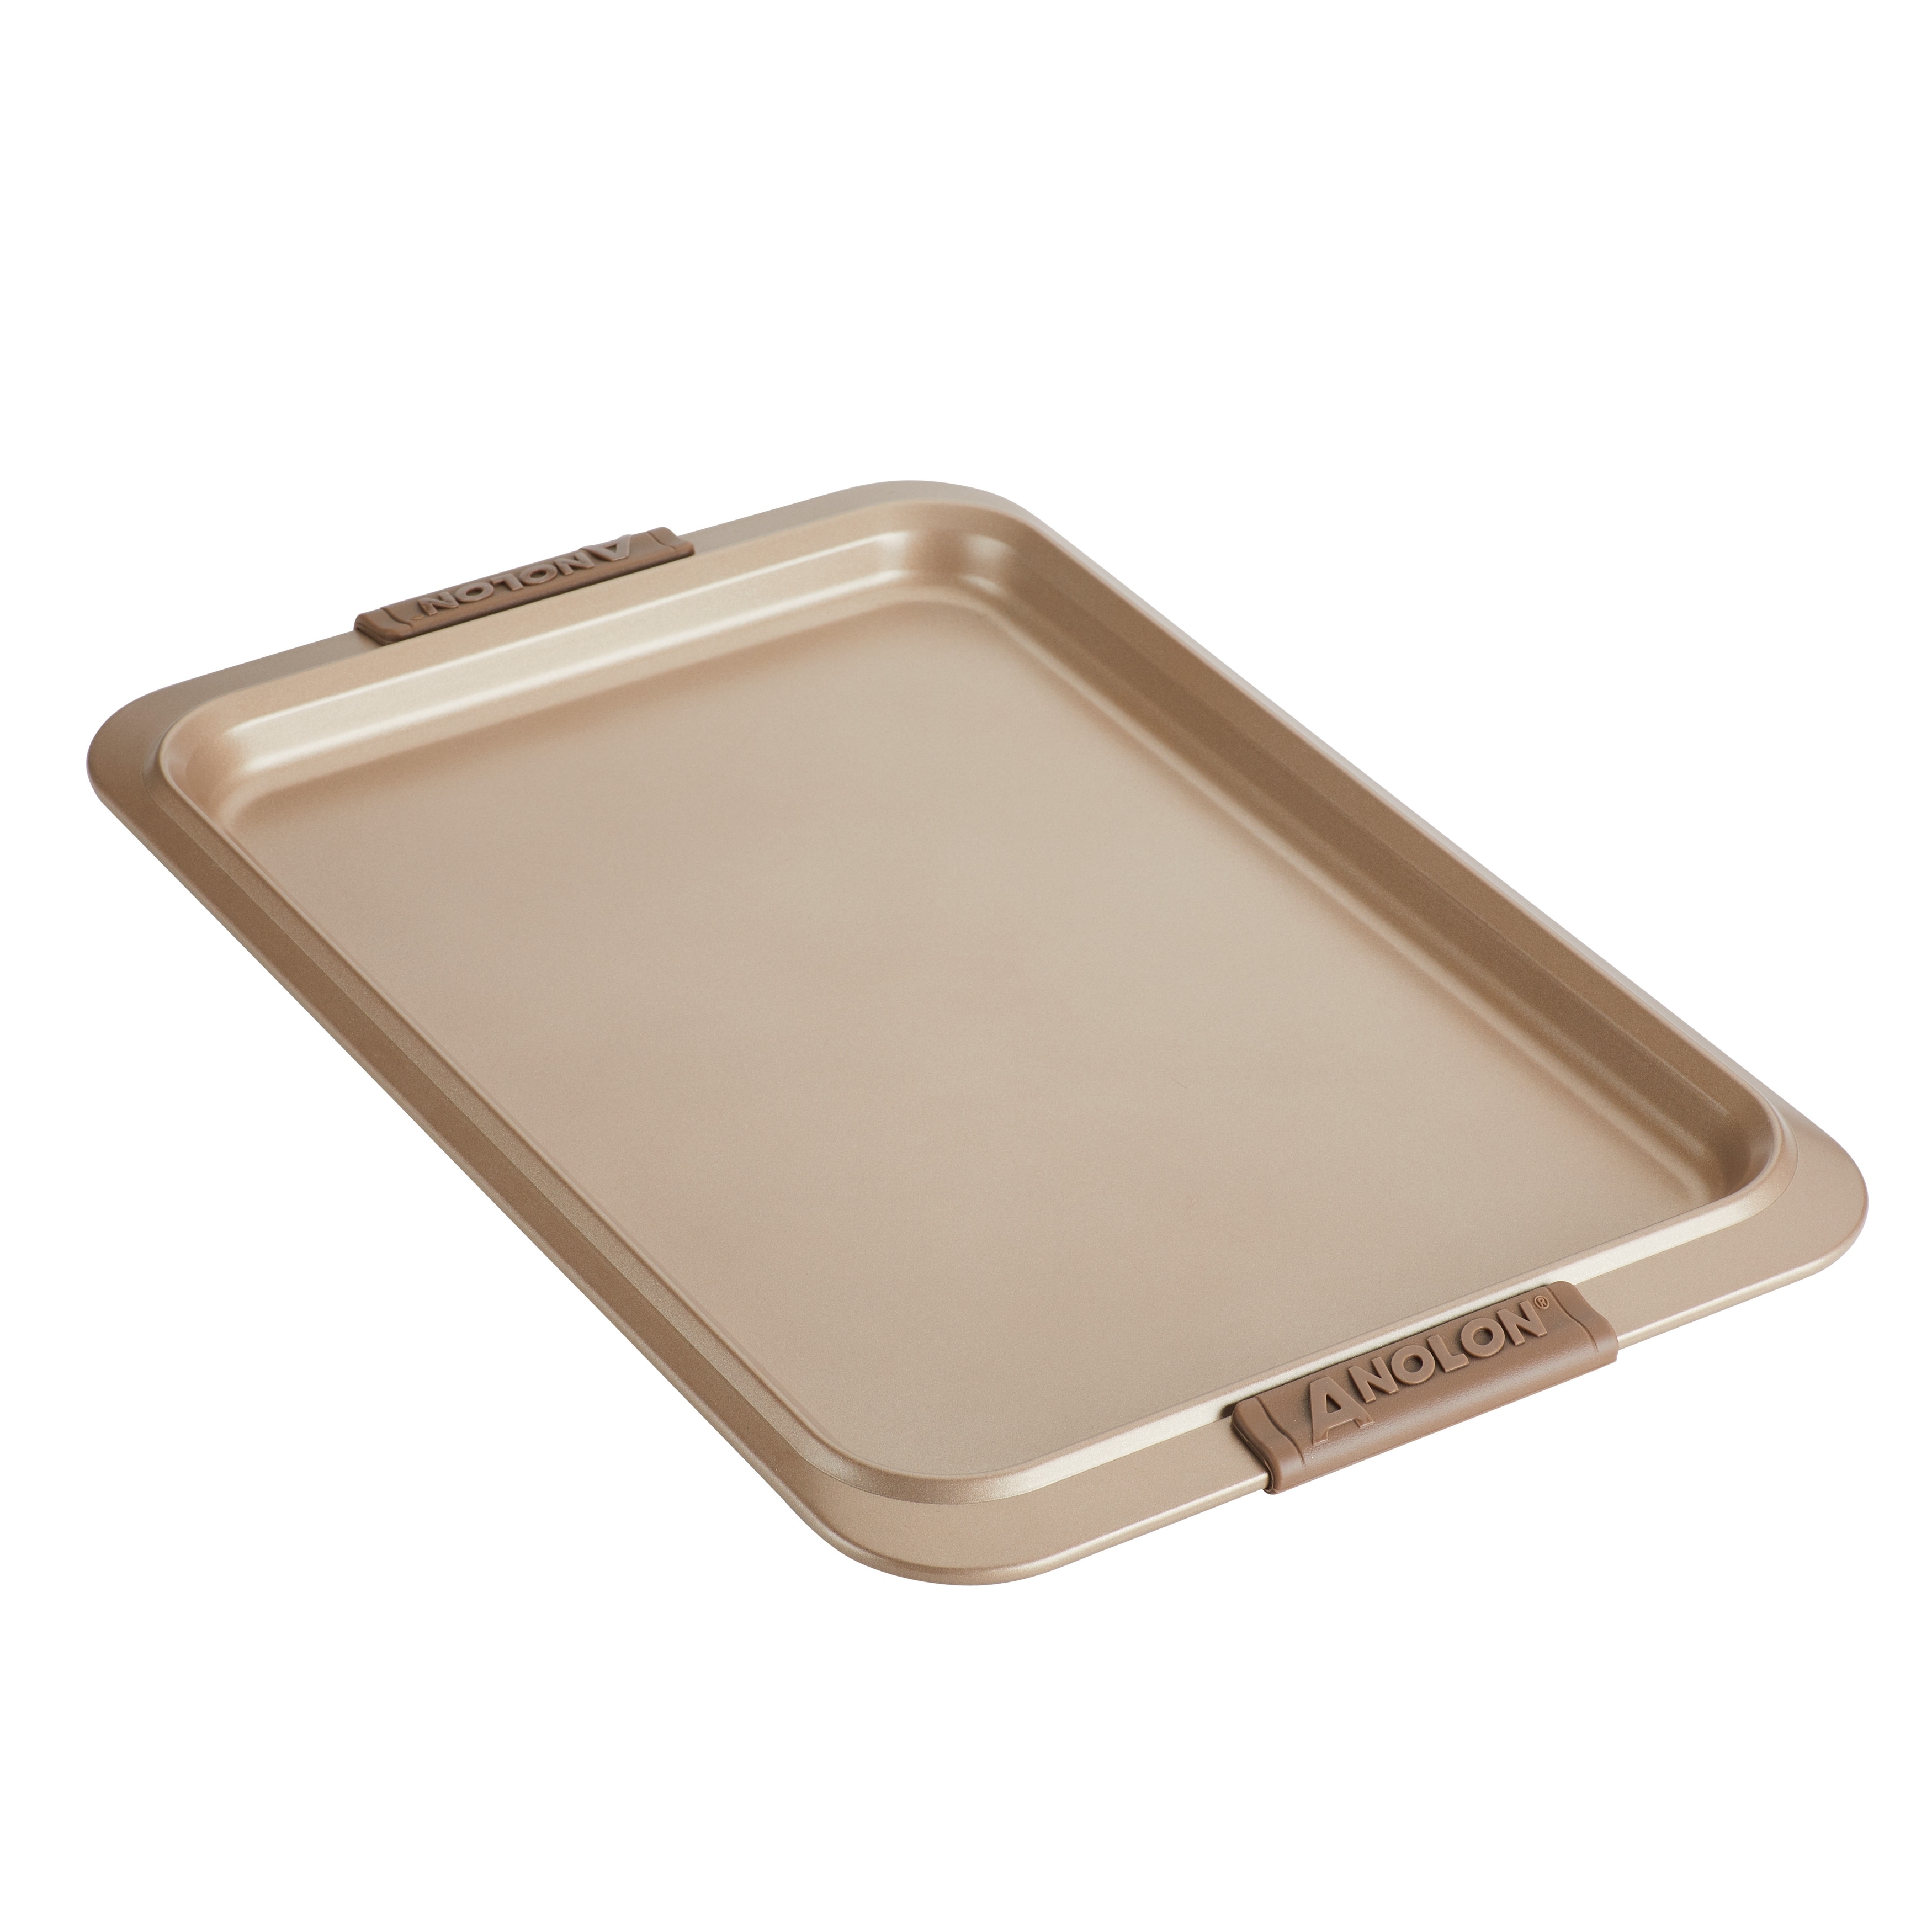 https://ak1.ostkcdn.com/images/products/is/images/direct/6b98bbeebe68f8a6a10200314b1b14e25a422a75/Anolon-Advanced-Bakeware-Nonstick-Baking-Sheet-Pan-with-Silicone-Grips%2C-10-Inch-x-15-Inch%2C-Bronze.jpg